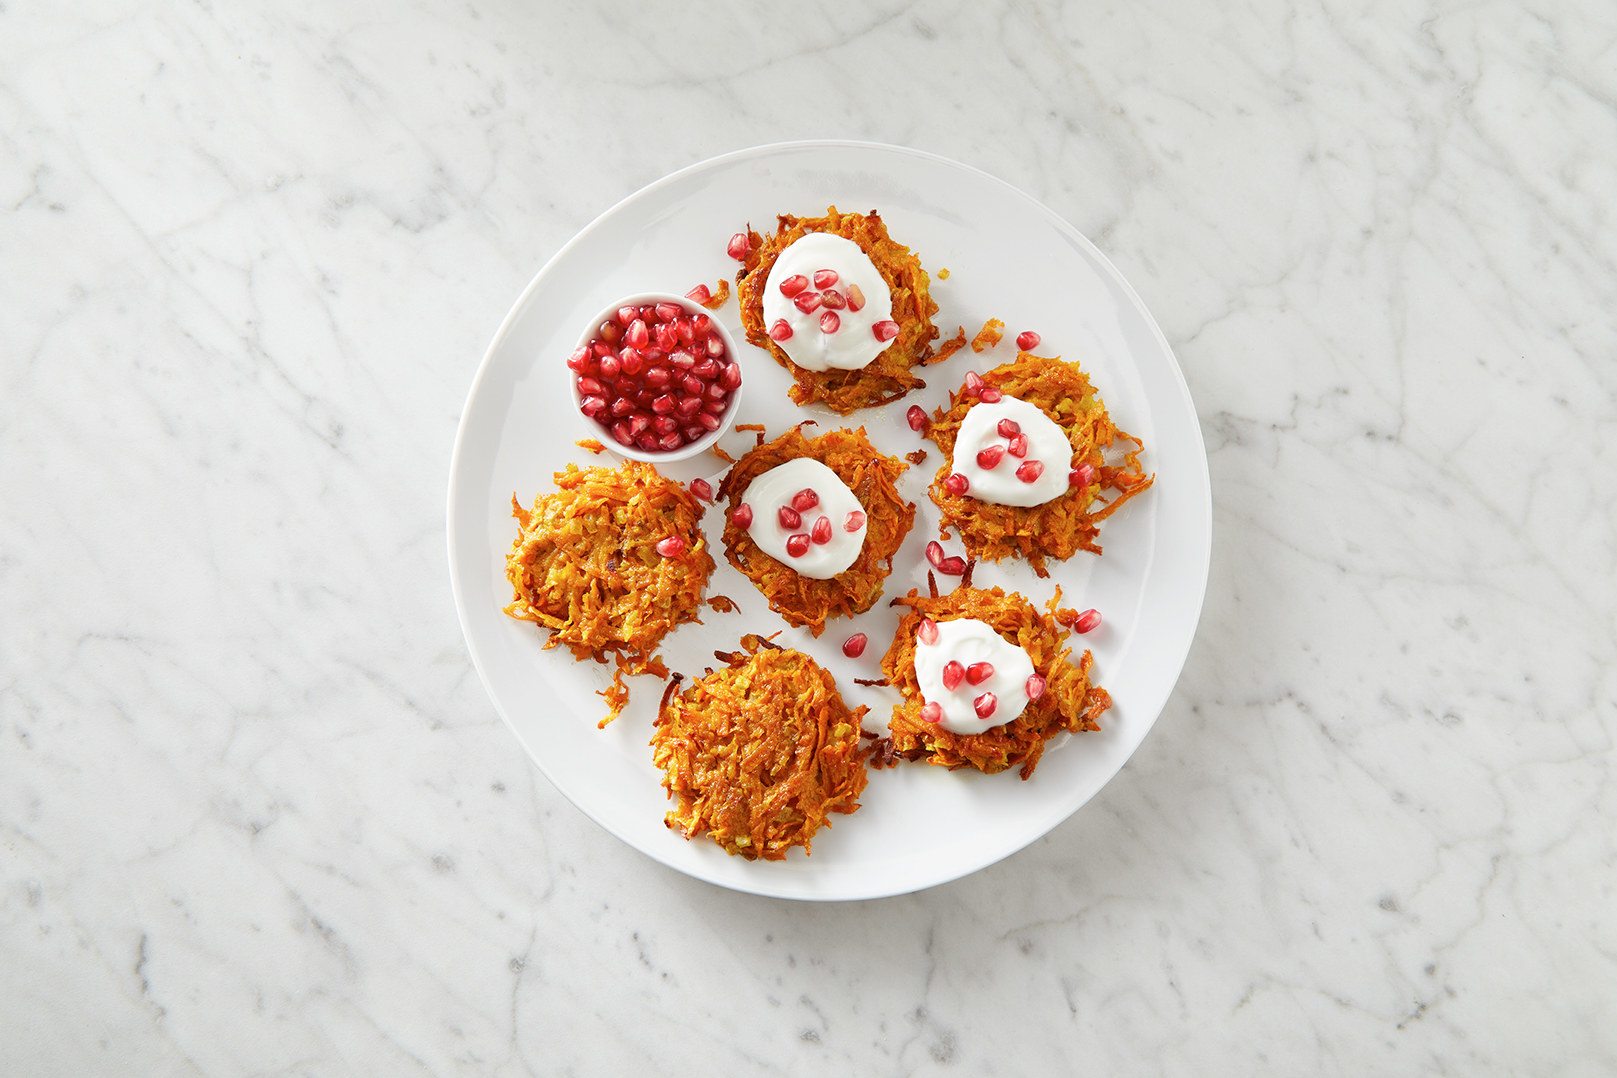 A plate of latkes garnished with sour cream and pomegranate seeds.